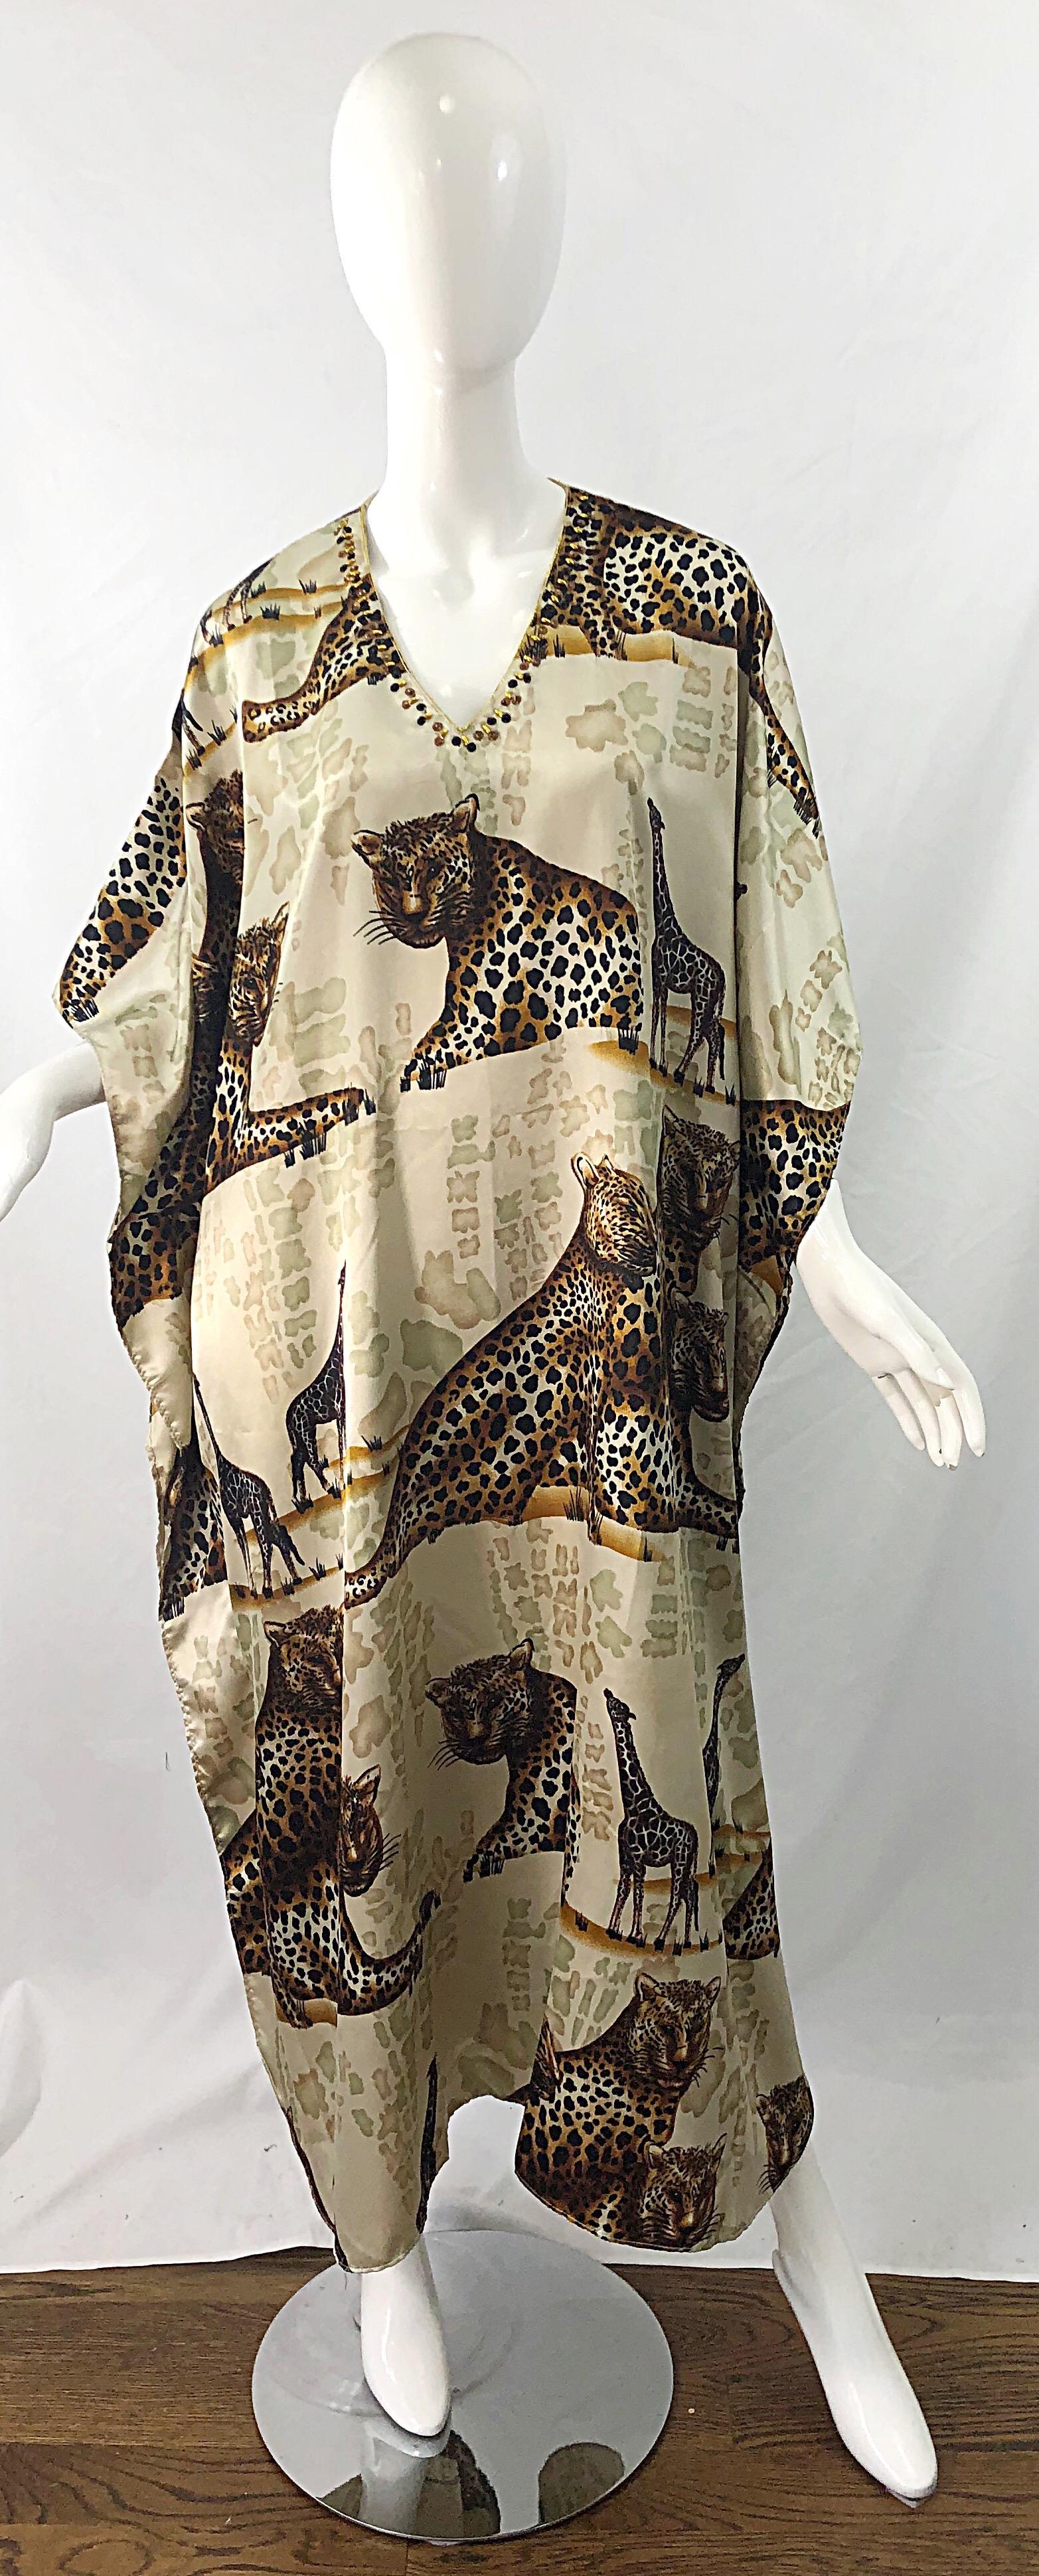 Channel your inner Joe Exotic or Carol Baskin in this amazing vintage animal print kaftan maxi dress ! Sequins and beads sewn around the collar. Features leopards, giraffes, etc printed throughout. Warm tones of brown, tan, ivory, rust, and black.